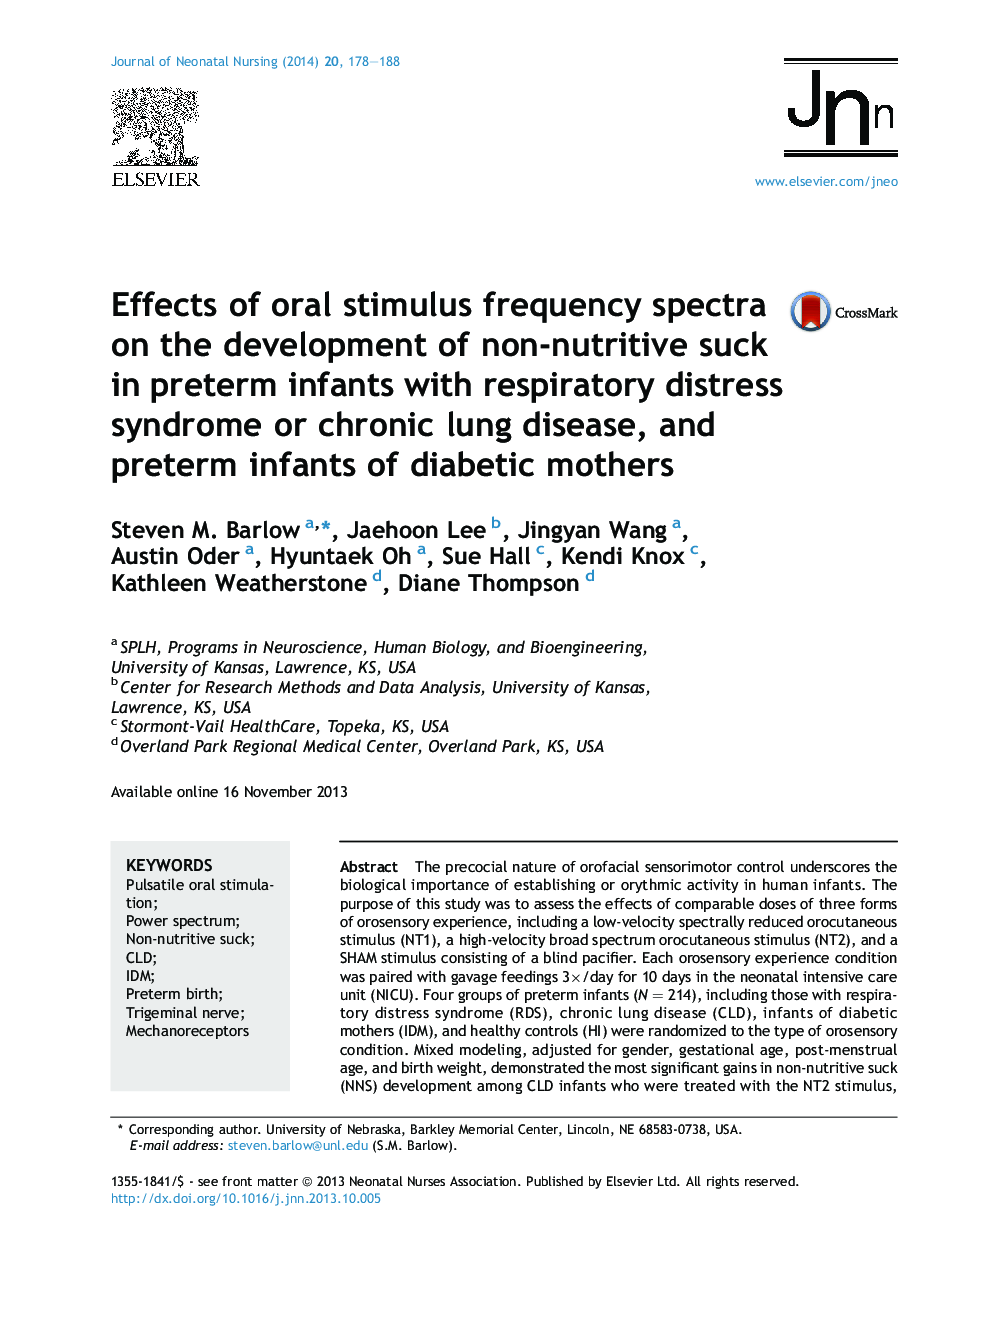 Effects of oral stimulus frequency spectra on the development of non-nutritive suck in preterm infants with respiratory distress syndrome or chronic lung disease, and preterm infants of diabetic mothers